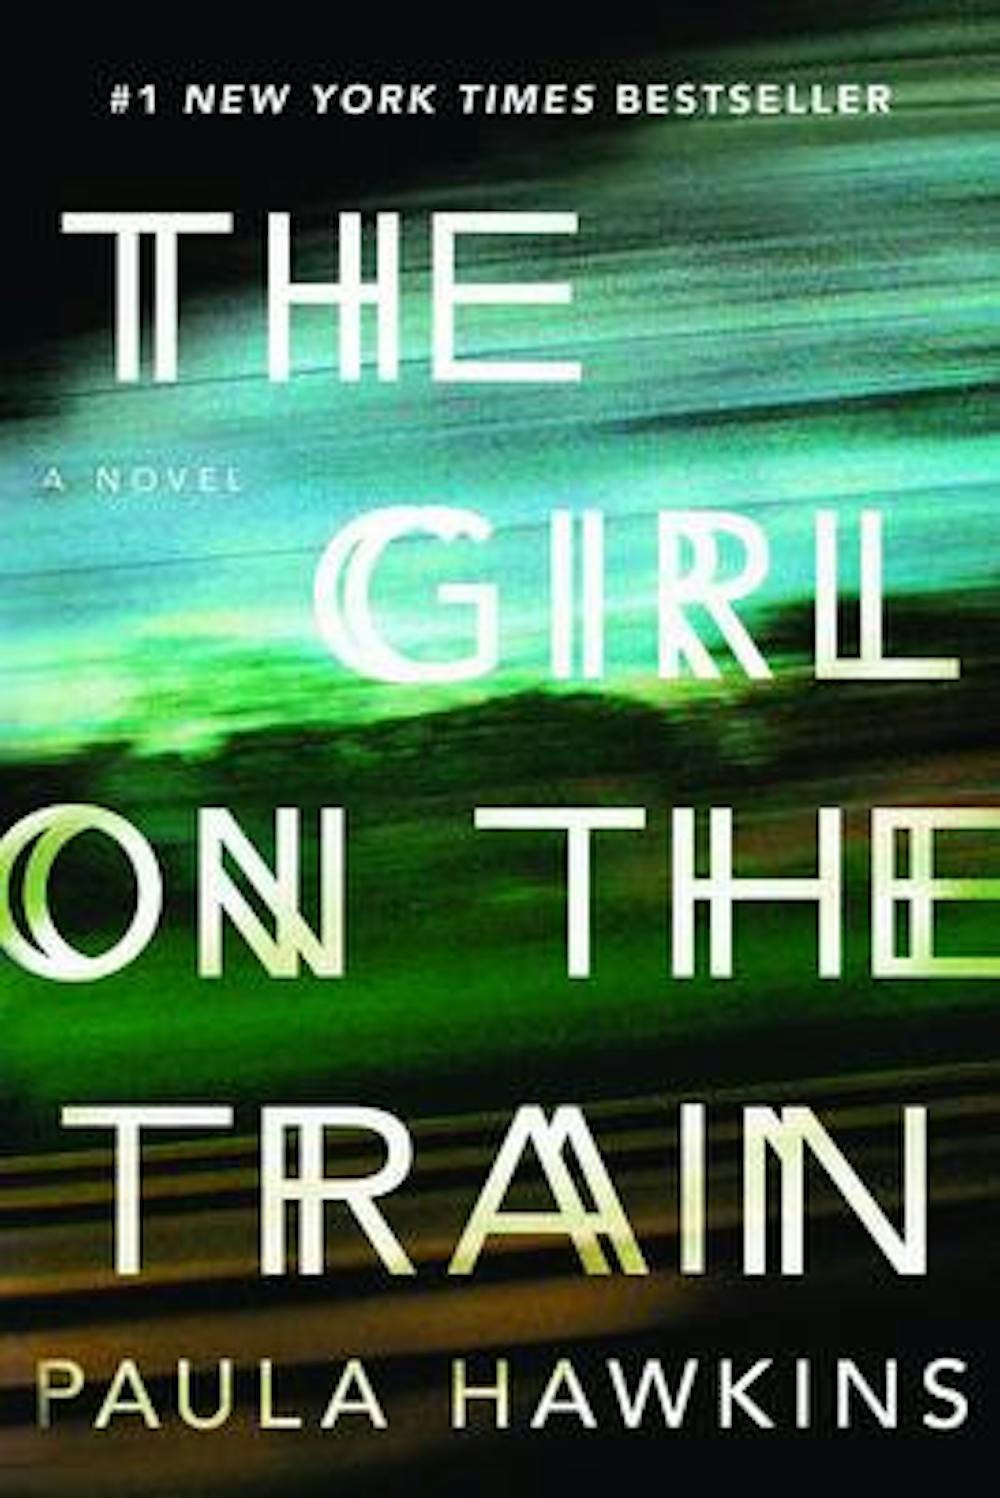 Though "The Girl on the Train" has stirred up a bit of controversy, the psychological thriller delivers an intricate and unsettling experience.